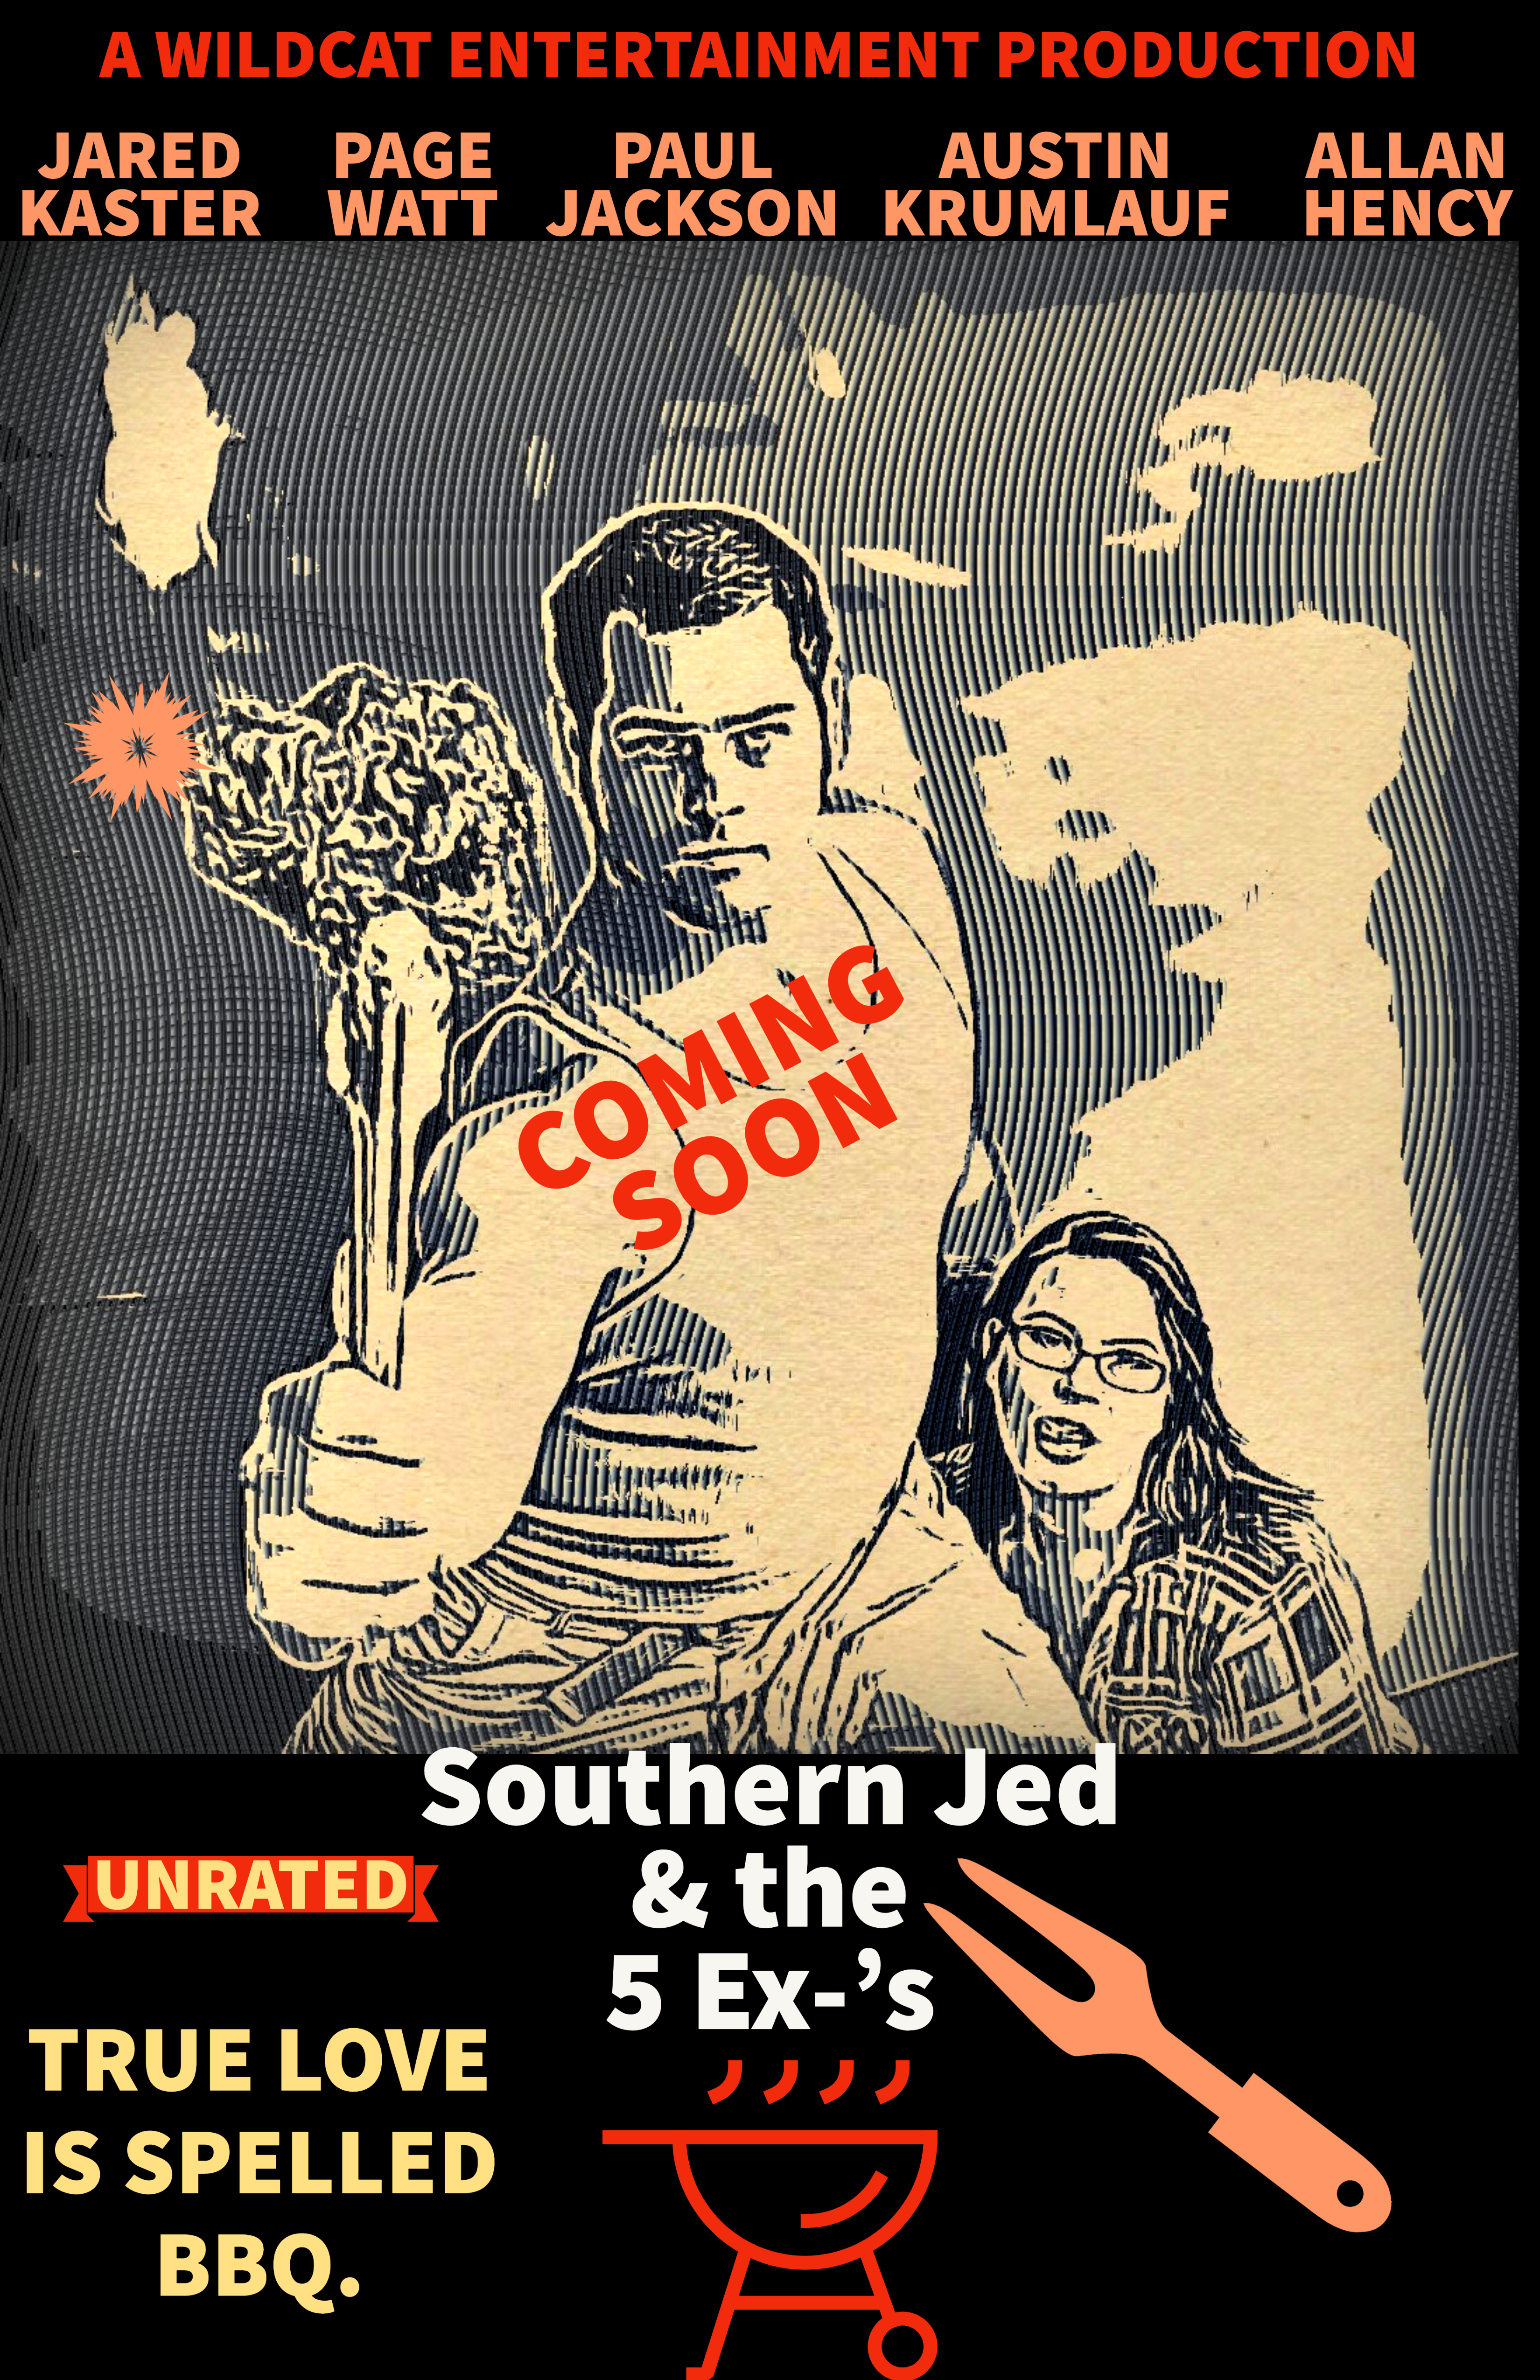 Southern Jed & The 5 Ex-'s